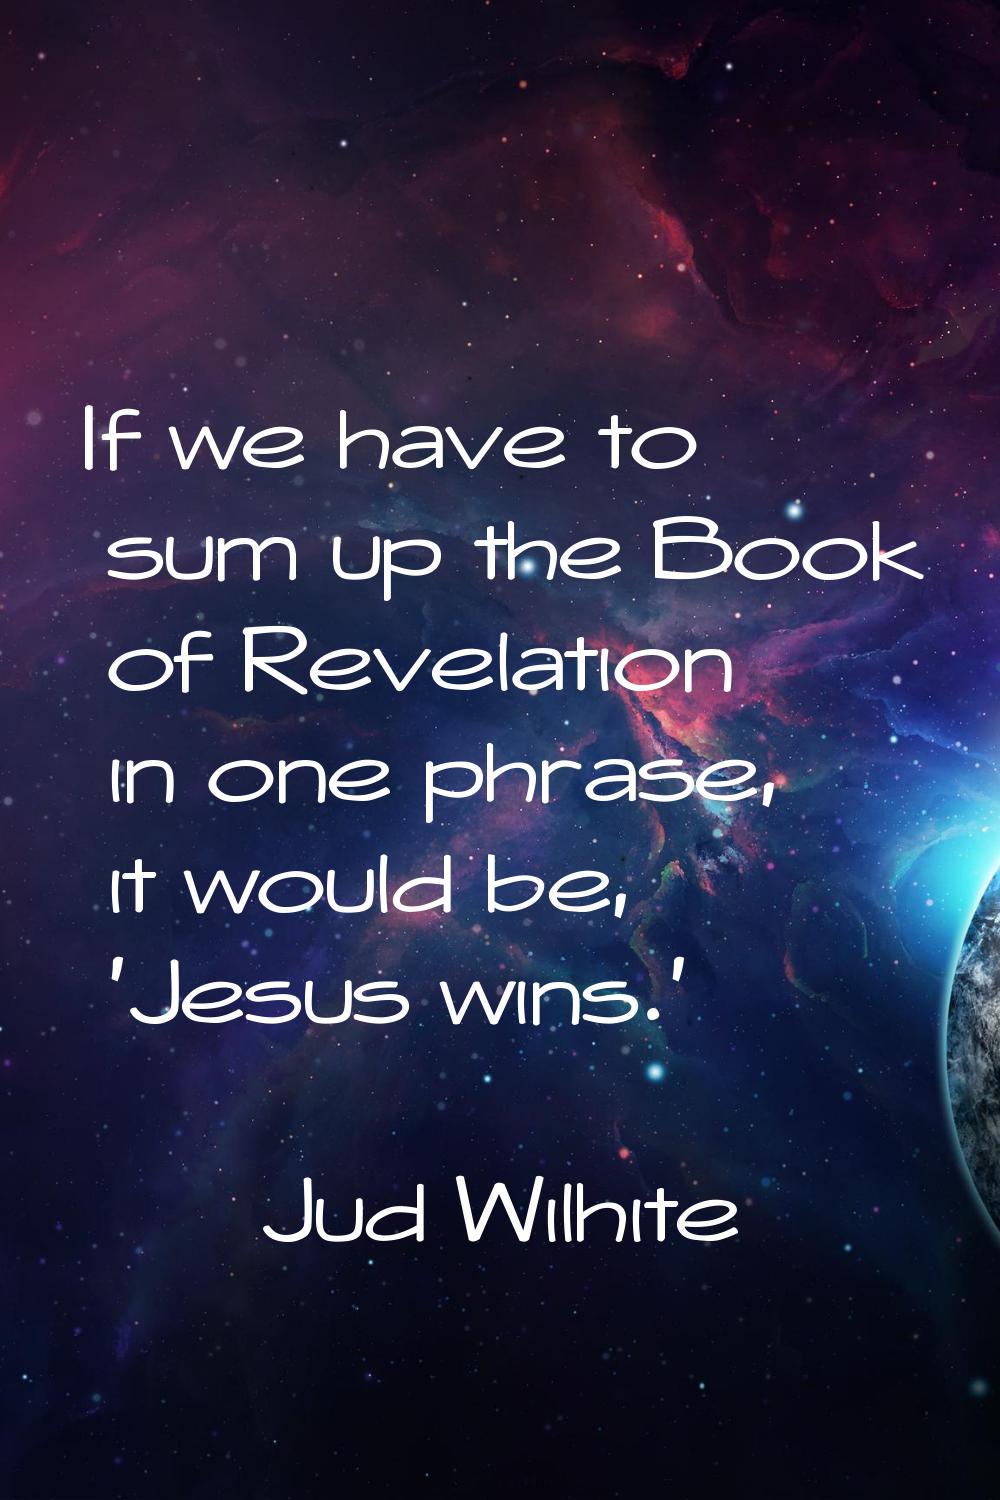 If we have to sum up the Book of Revelation in one phrase, it would be, 'Jesus wins.'